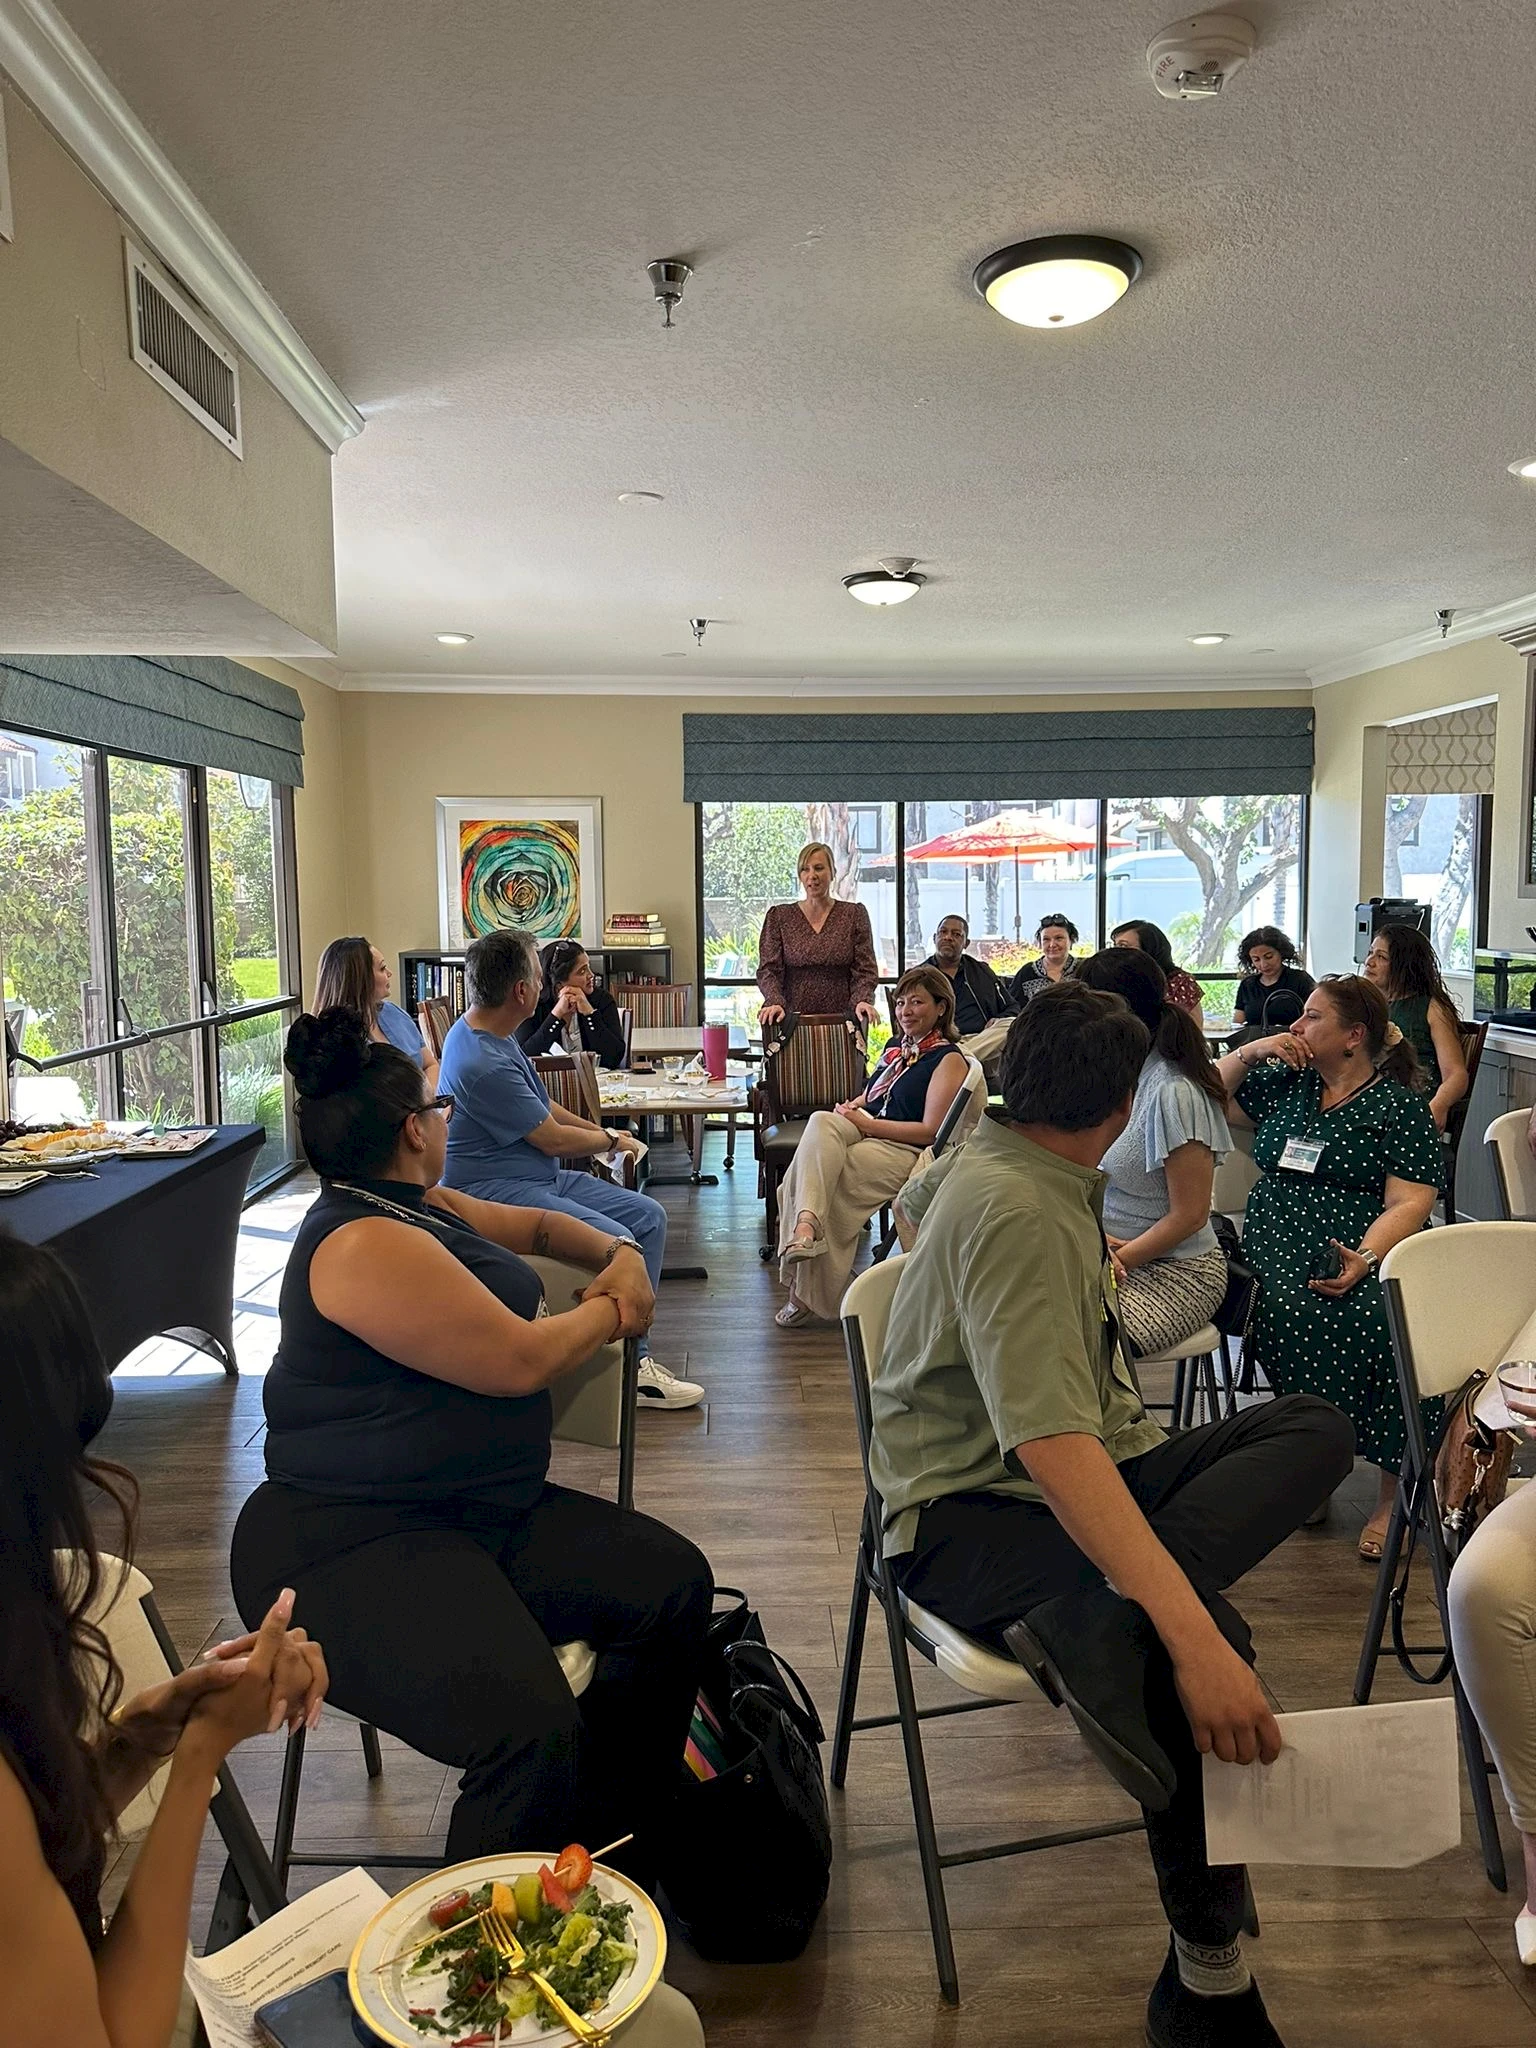 A fantastic meeting with our Dynamic Business Networking Connection Circle Group! We had some insightful speakers from Phoenix Prosperity Life Insurance and Advanced Home Dialysis as well as our keynote speaker from Premier Spine Surgery!